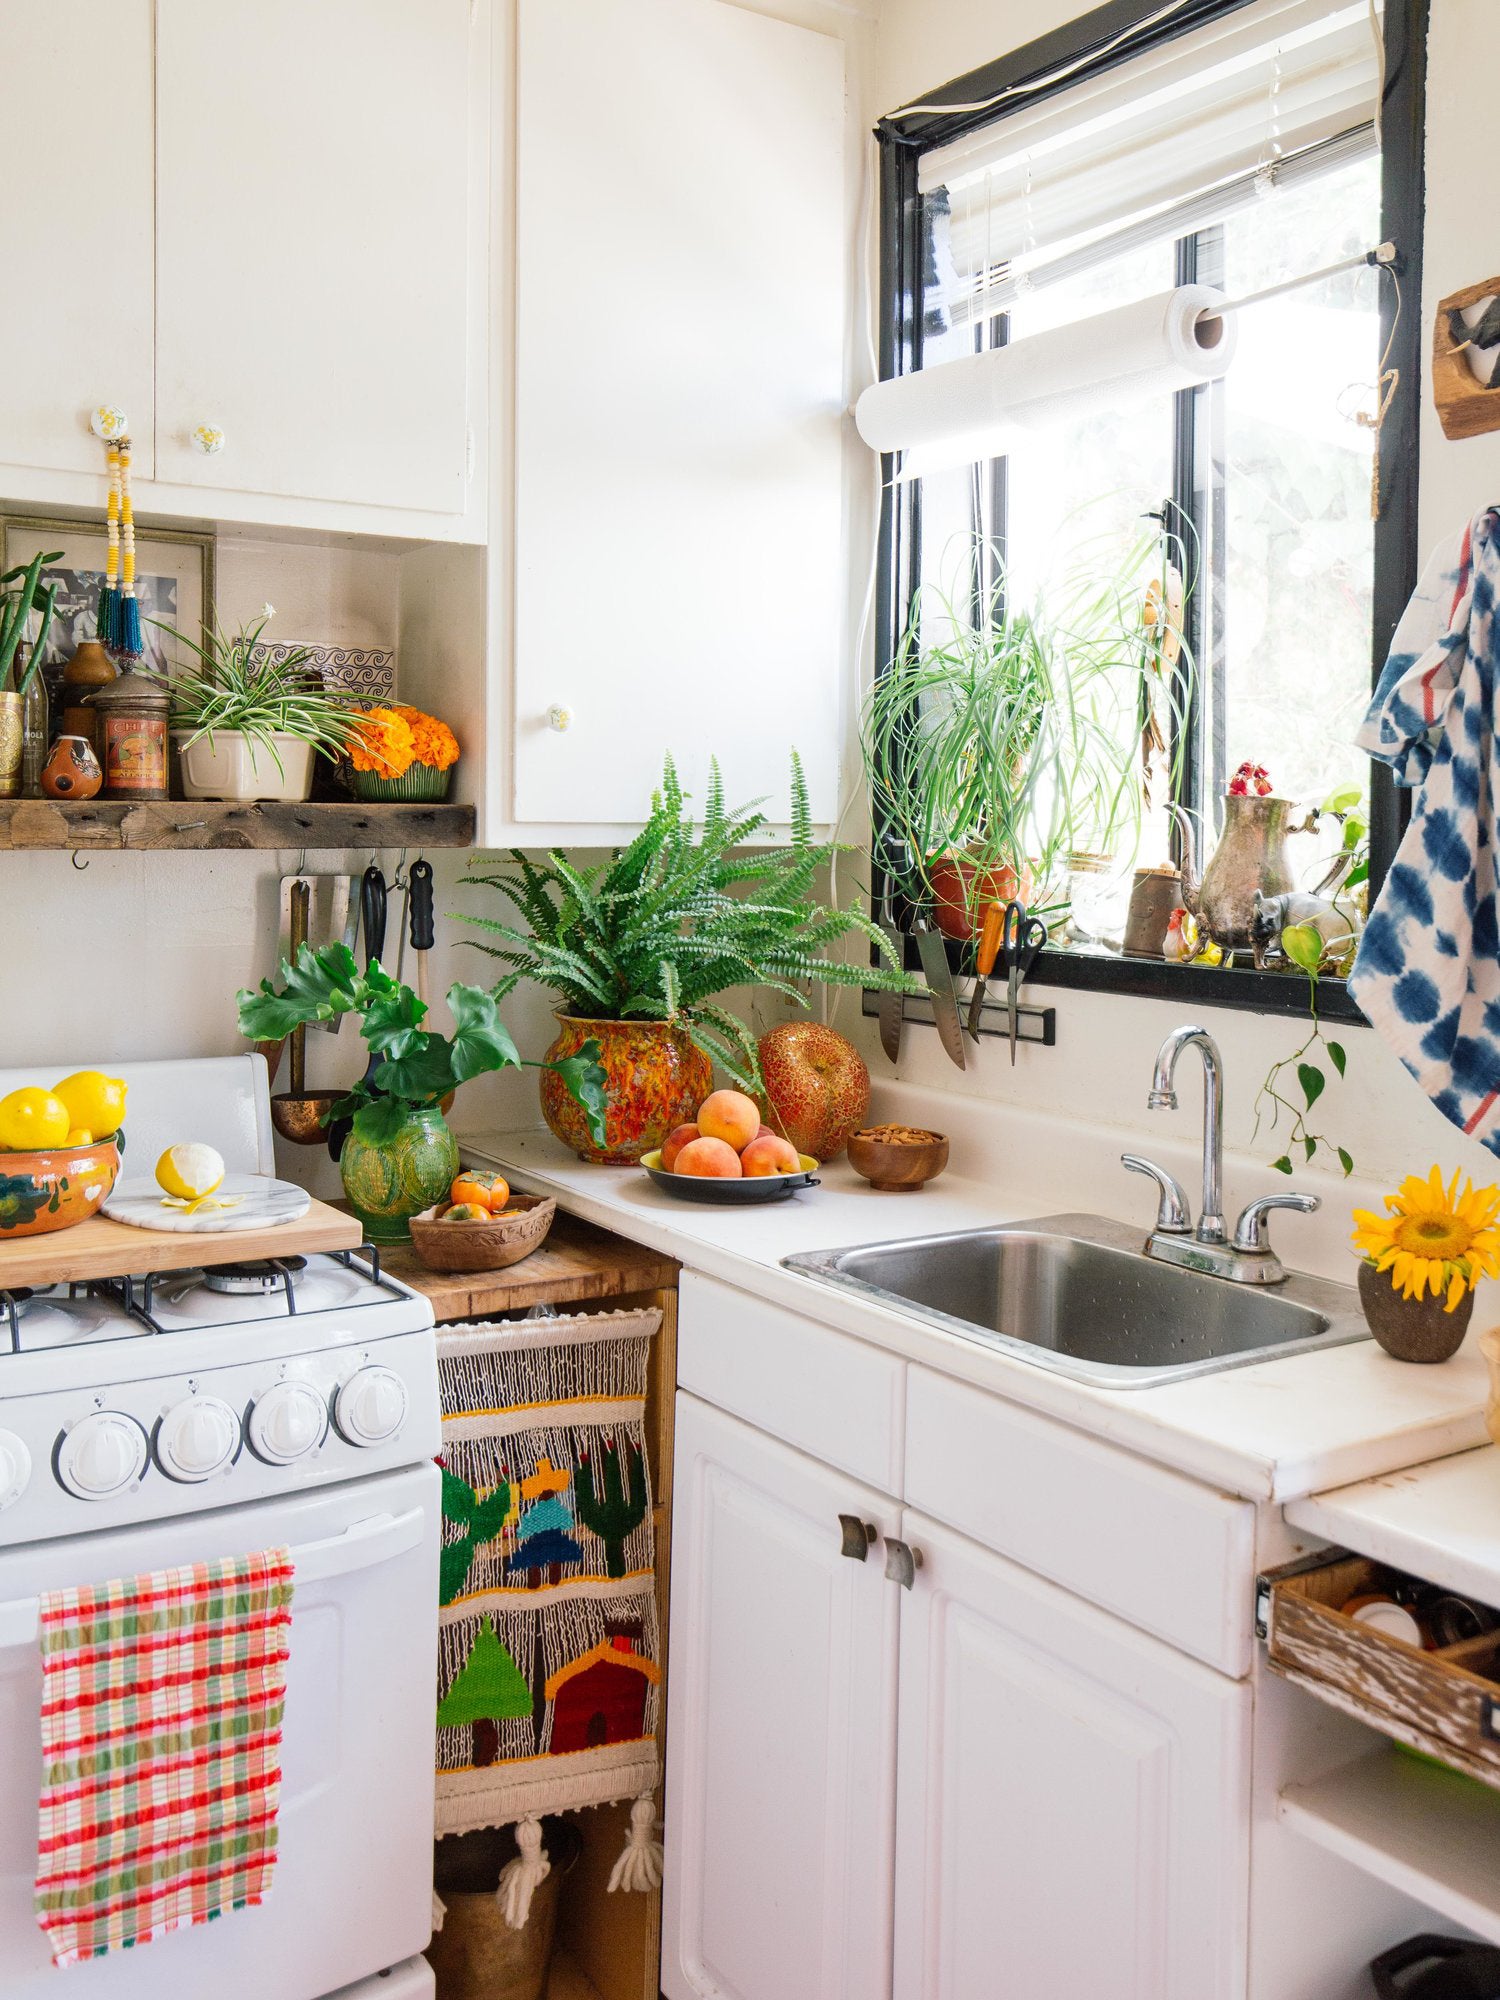 8 Tiny House Kitchen Ideas To Help You Make the Most of Your Small